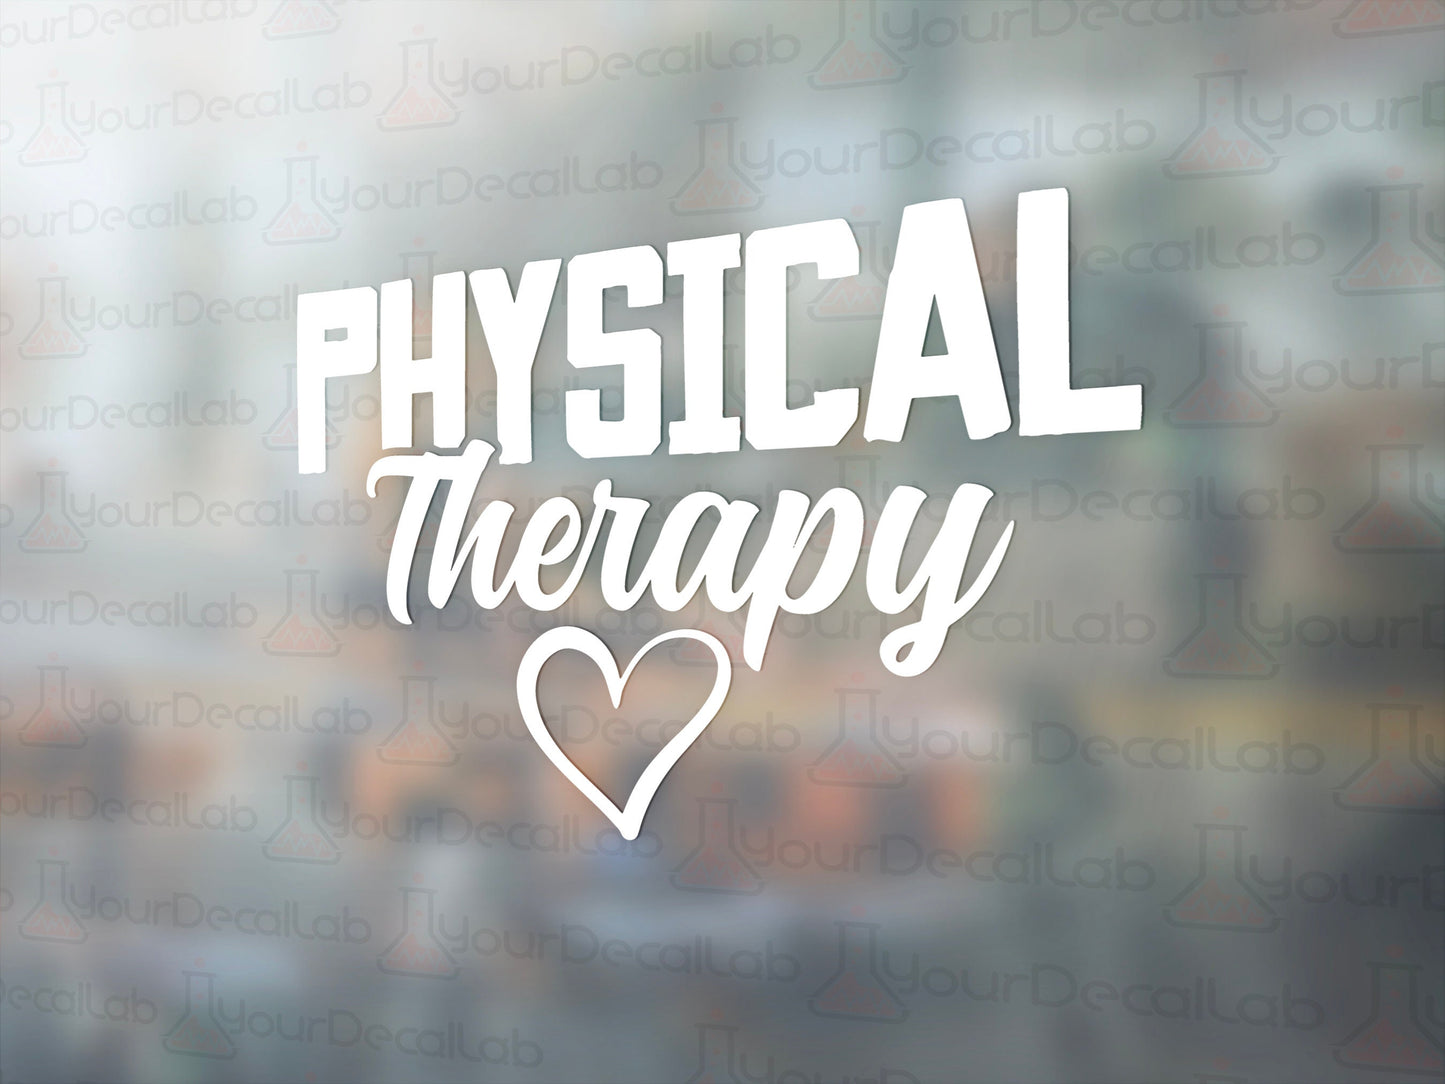 Physical Therapy Decal - Many Colors & Sizes